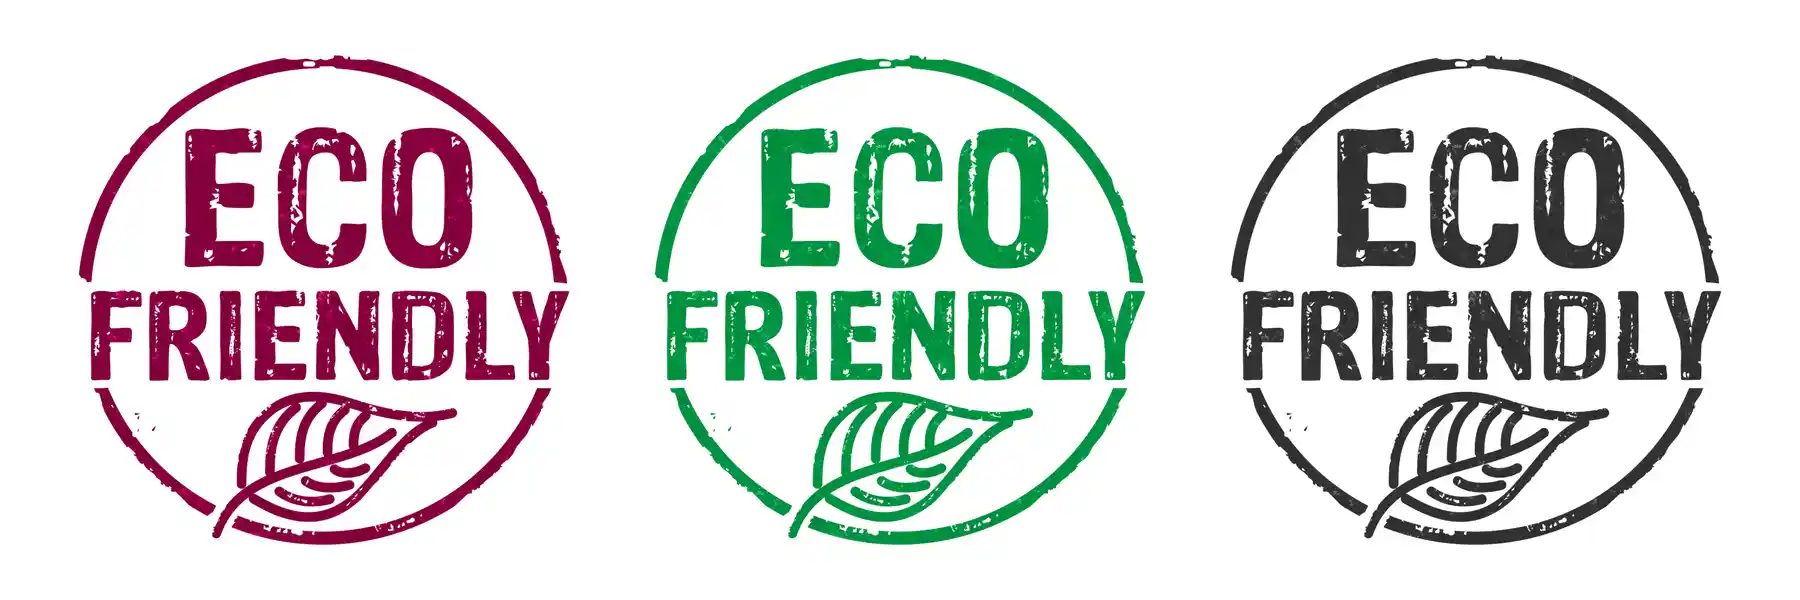 eco friendly labels show products that don't harm the environment